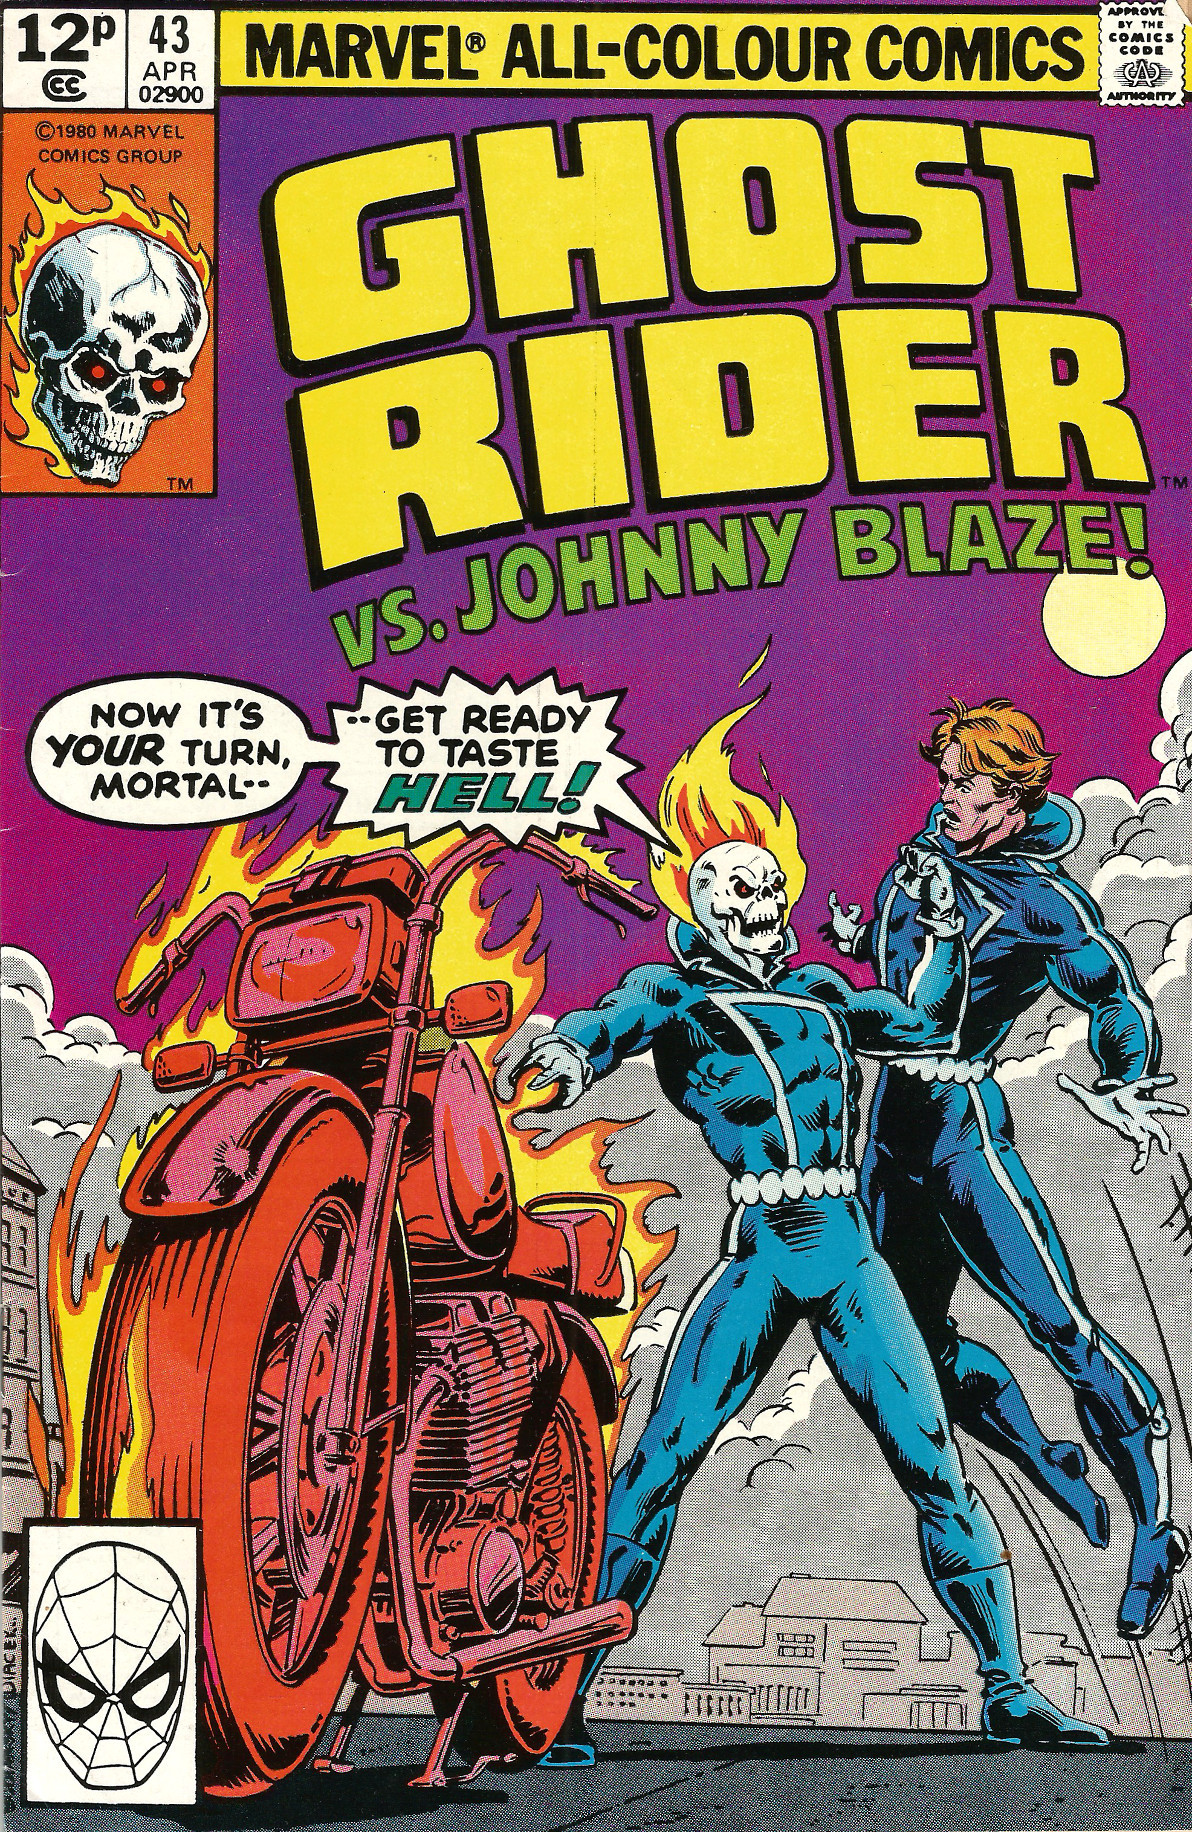 Ghost Rider No. 43 (Marvel Comics, 1980). Cover art by Bob Budiansky.From Oxfam in